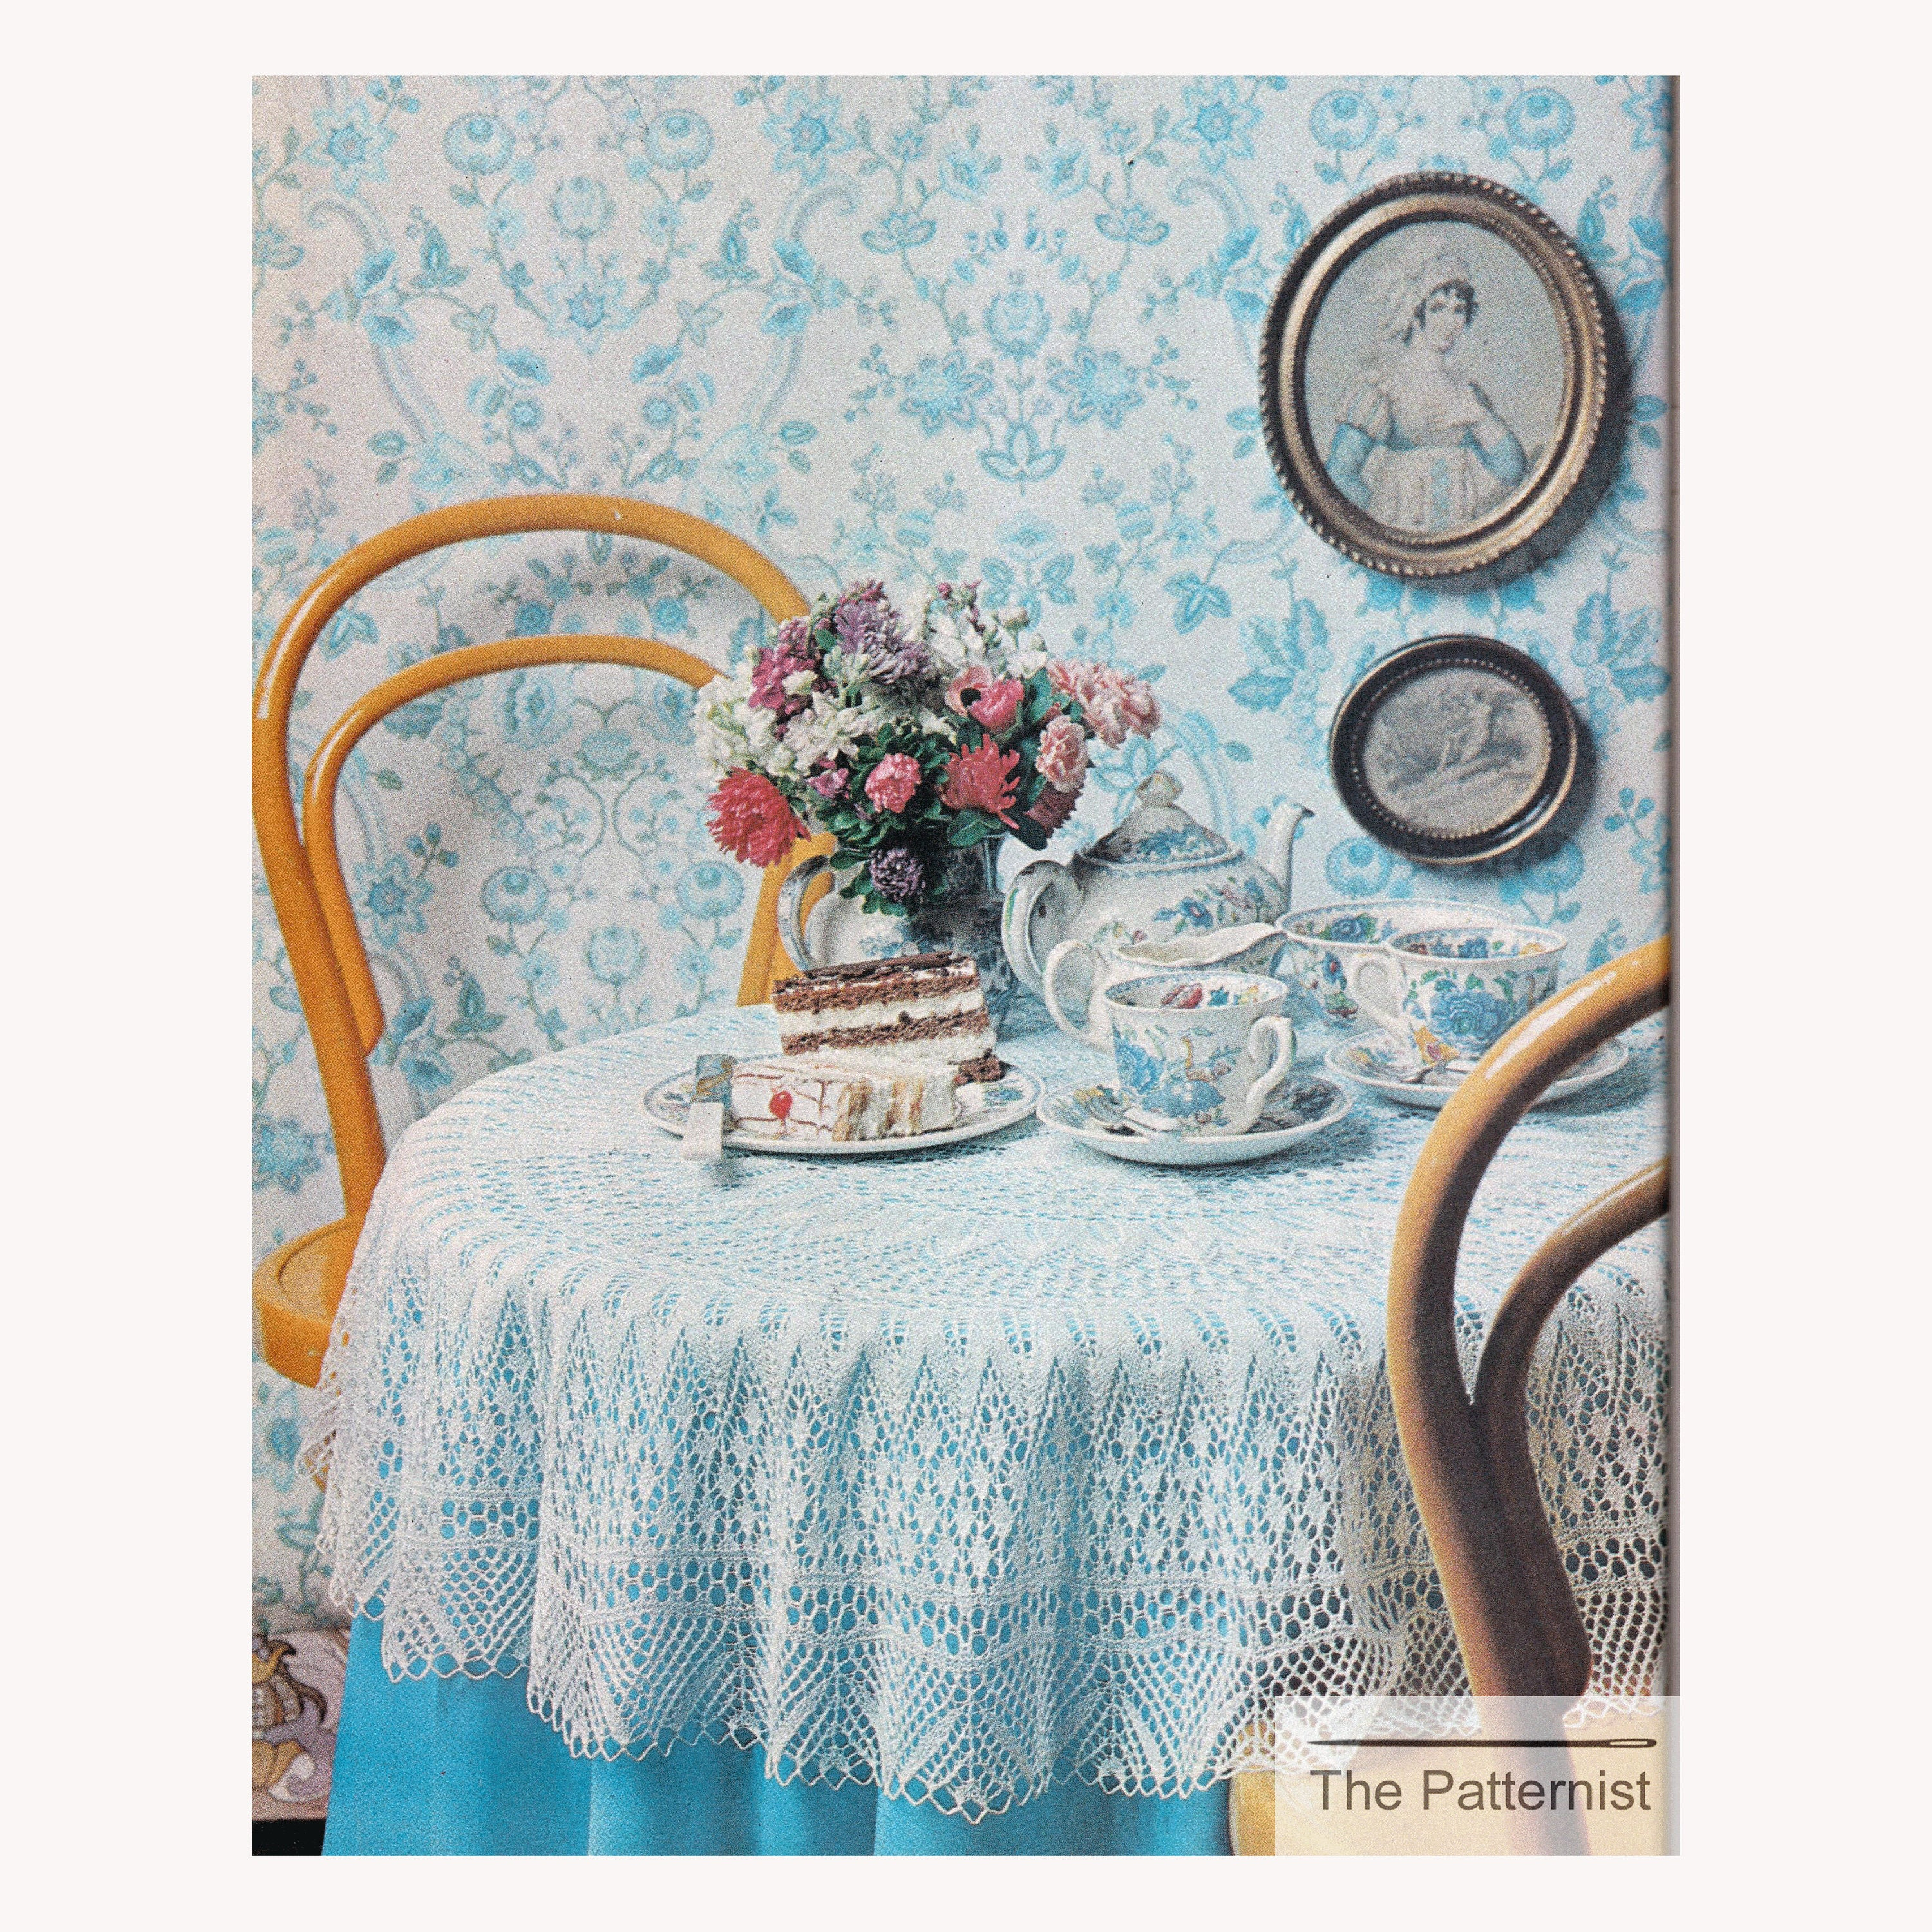 Knitting Patterns For Tablecloths Vintage Knitting Pattern For Circular Tablecloth Round Tablecloth Knitting Pattern Pdf Digital Download Sku 101 3